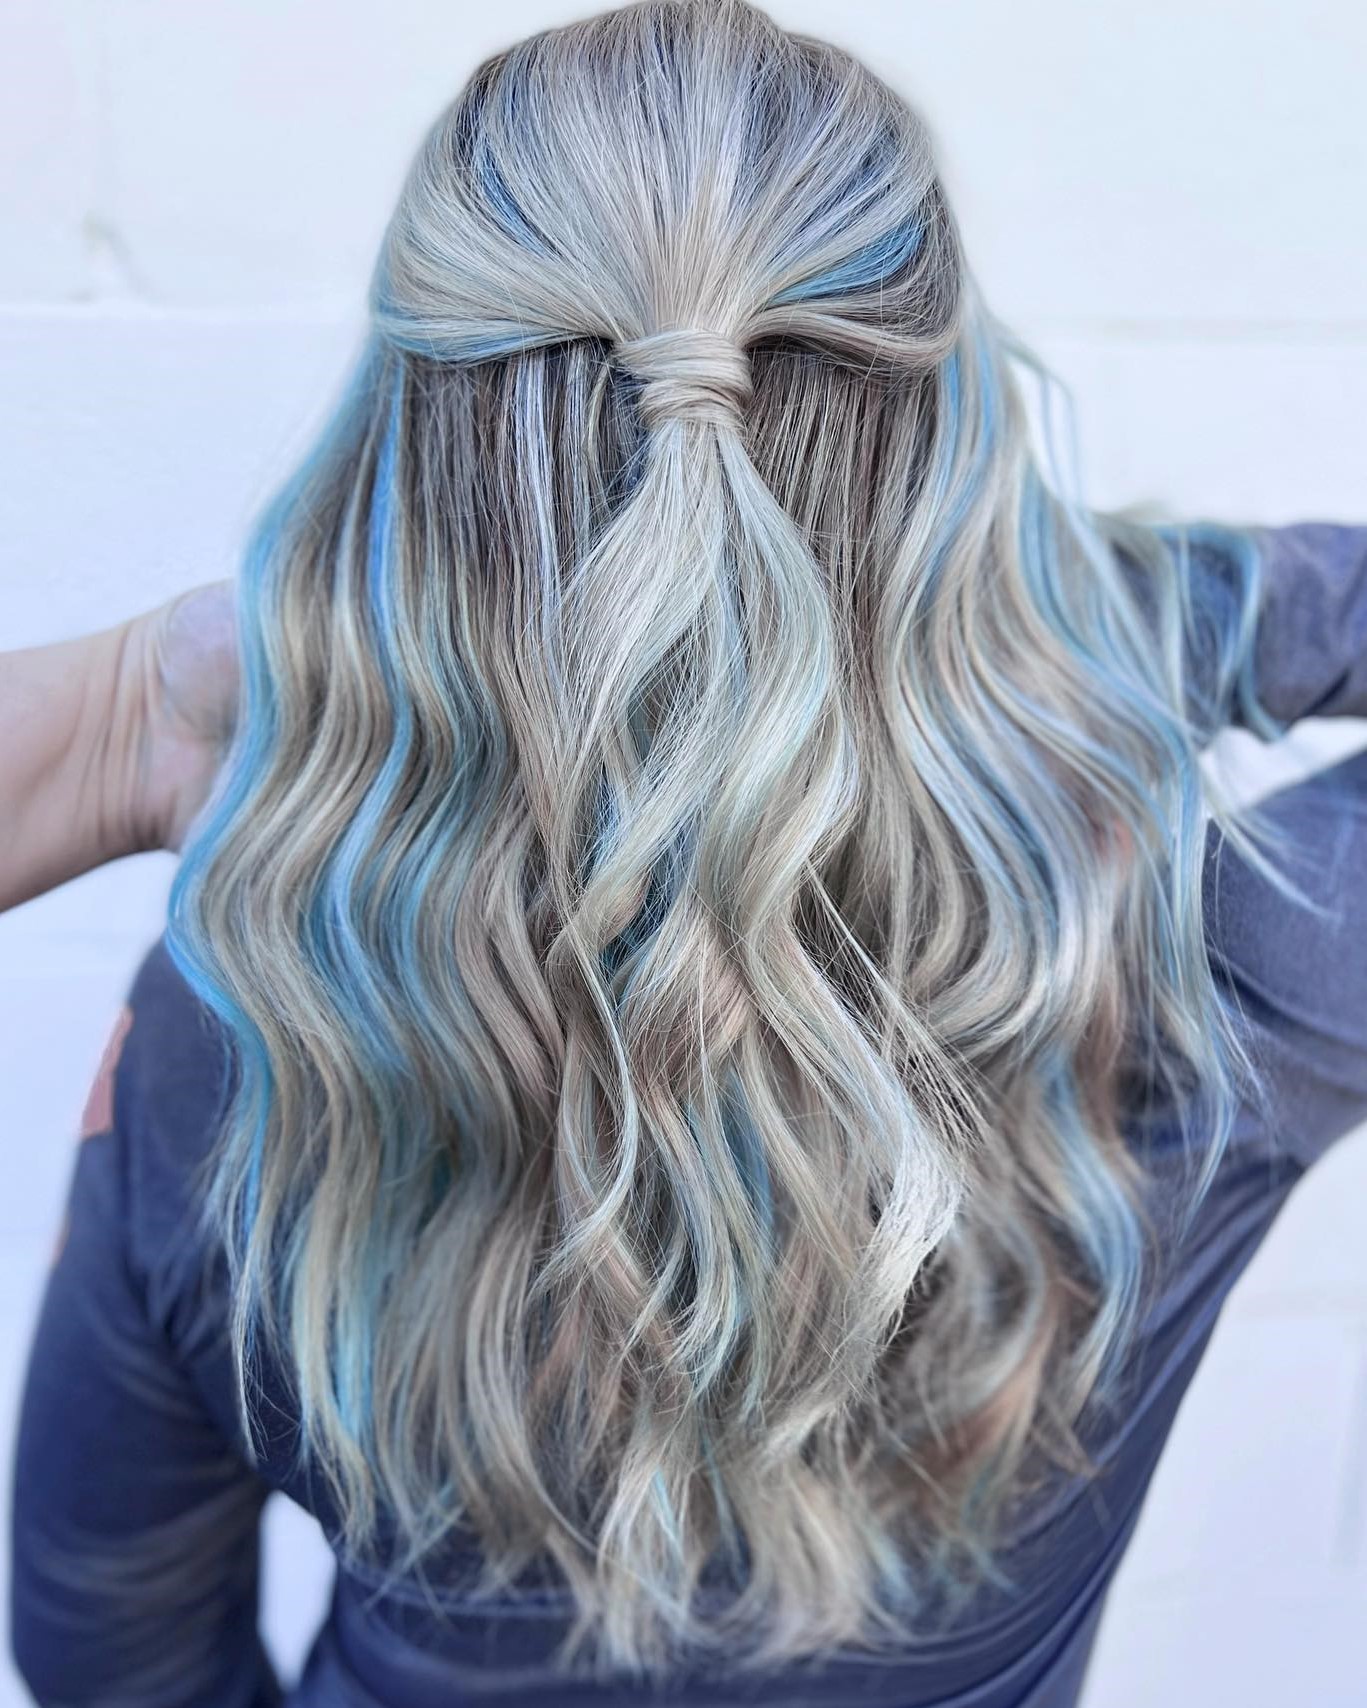 Blonde Hair with Blue Highlights